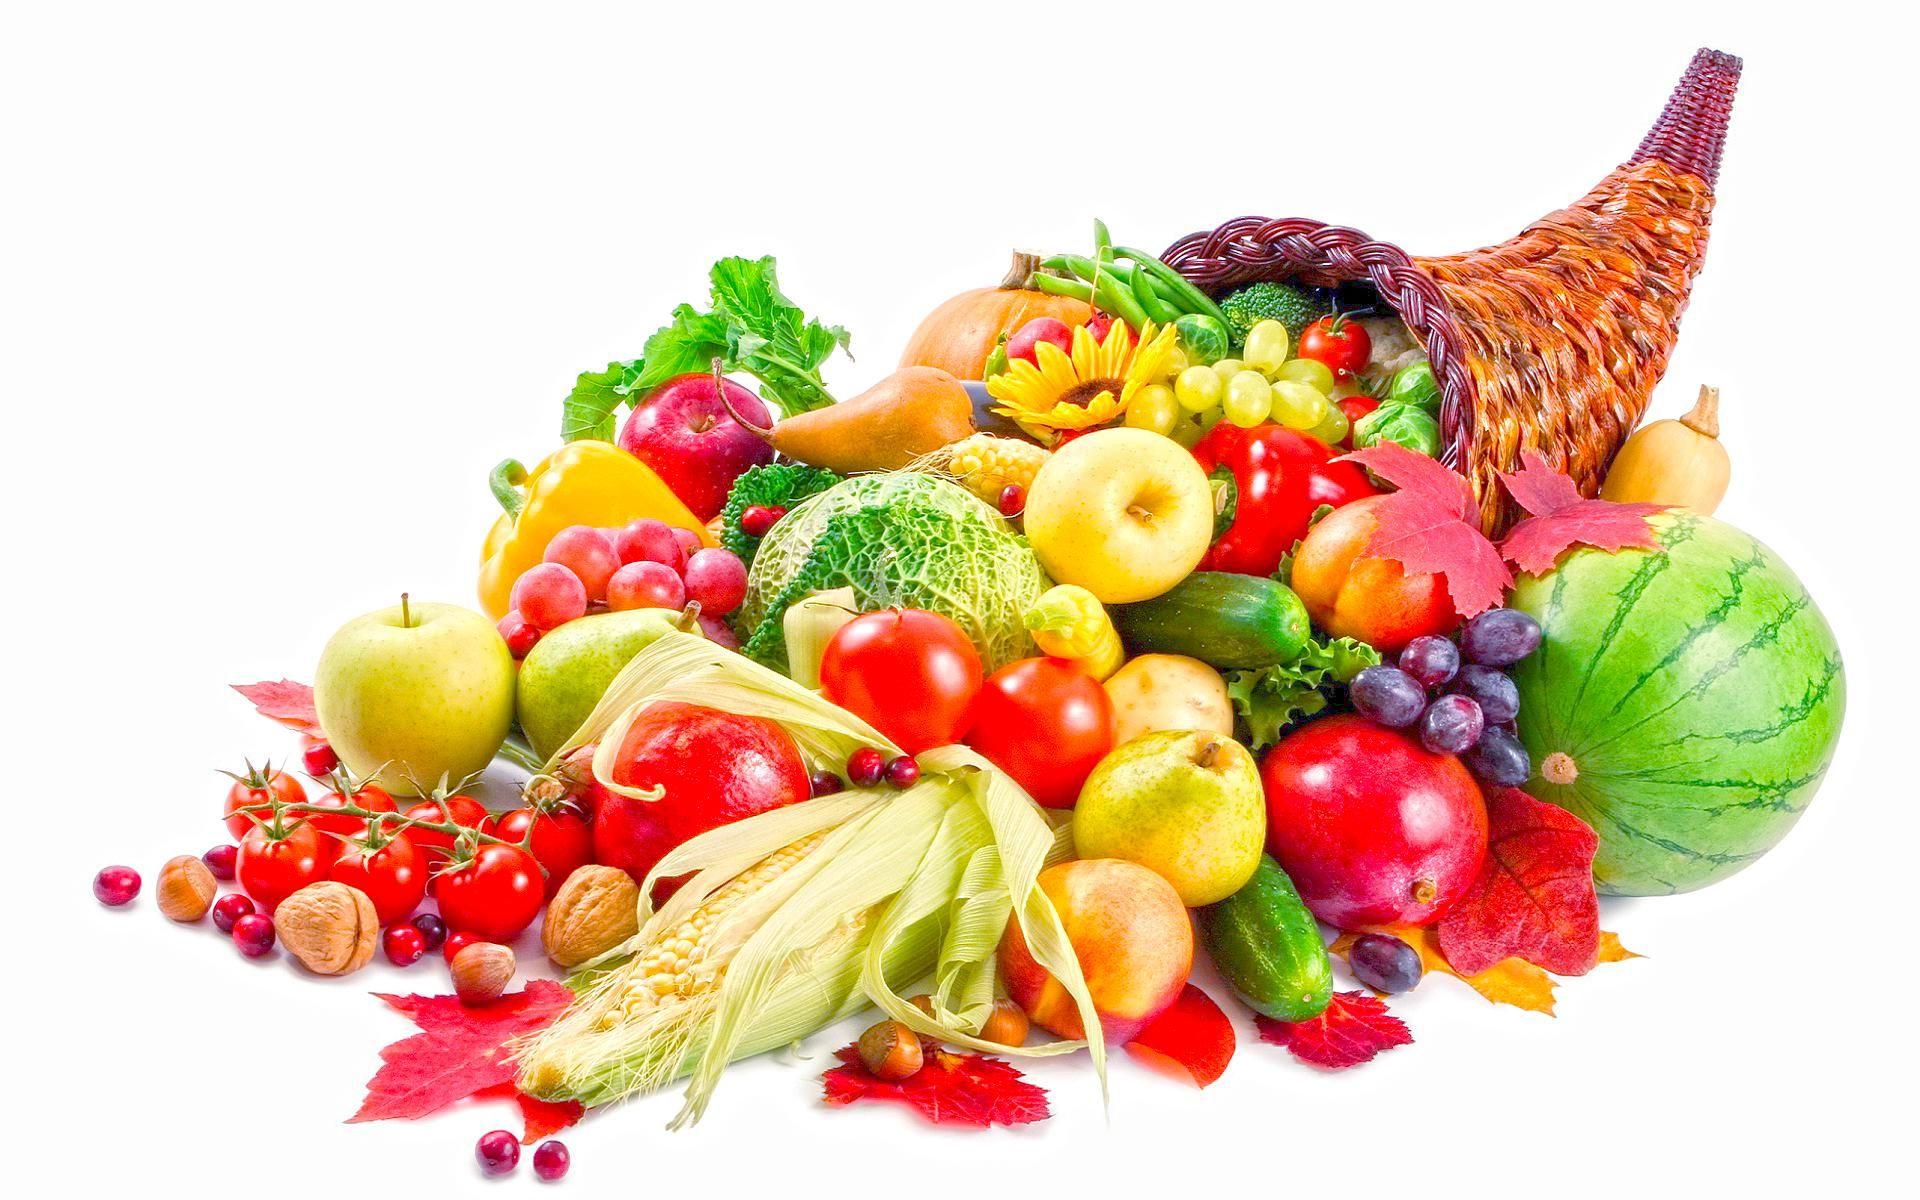 Fresh vegetables and fruits HD wallpaperNew HD wallpaper